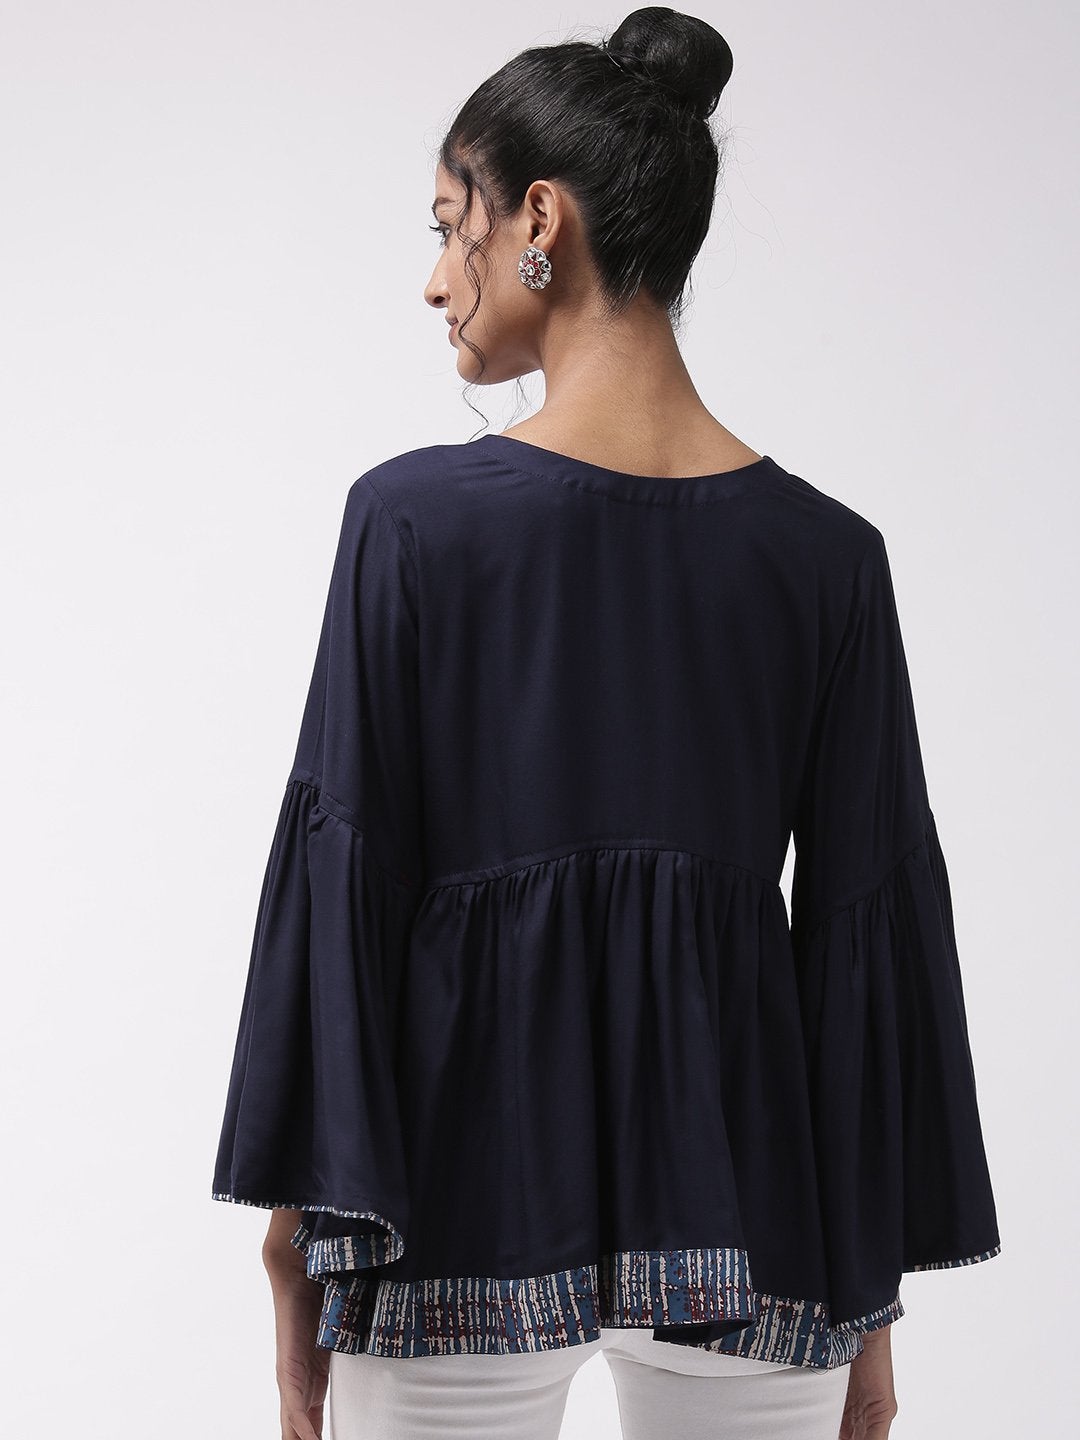 Women's Navy Blue Bell Sleeves Top With Border - InWeave